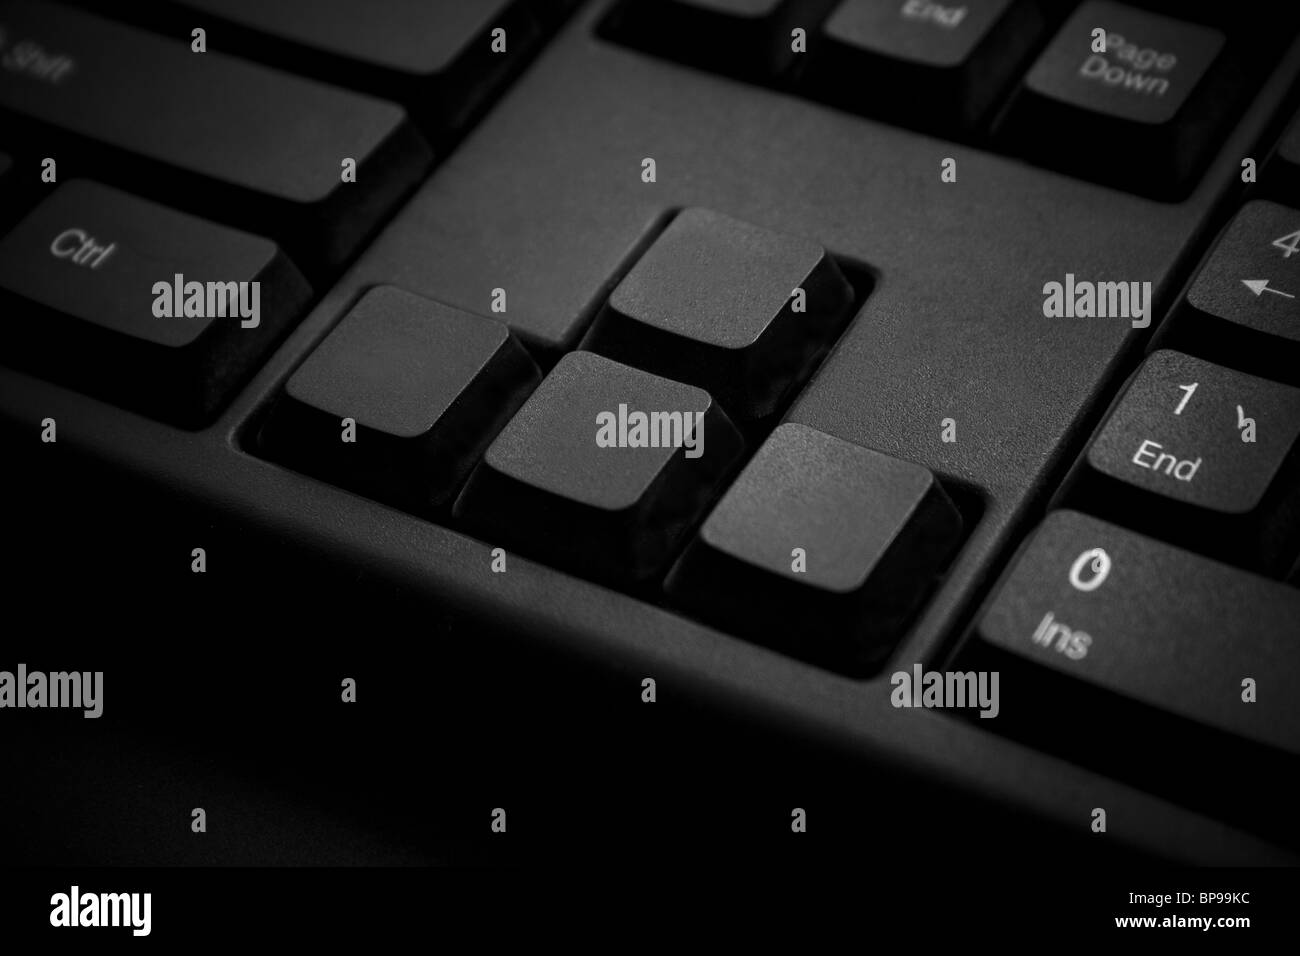 A close-up of four Blank keys on a Keyboard. Stock Photo